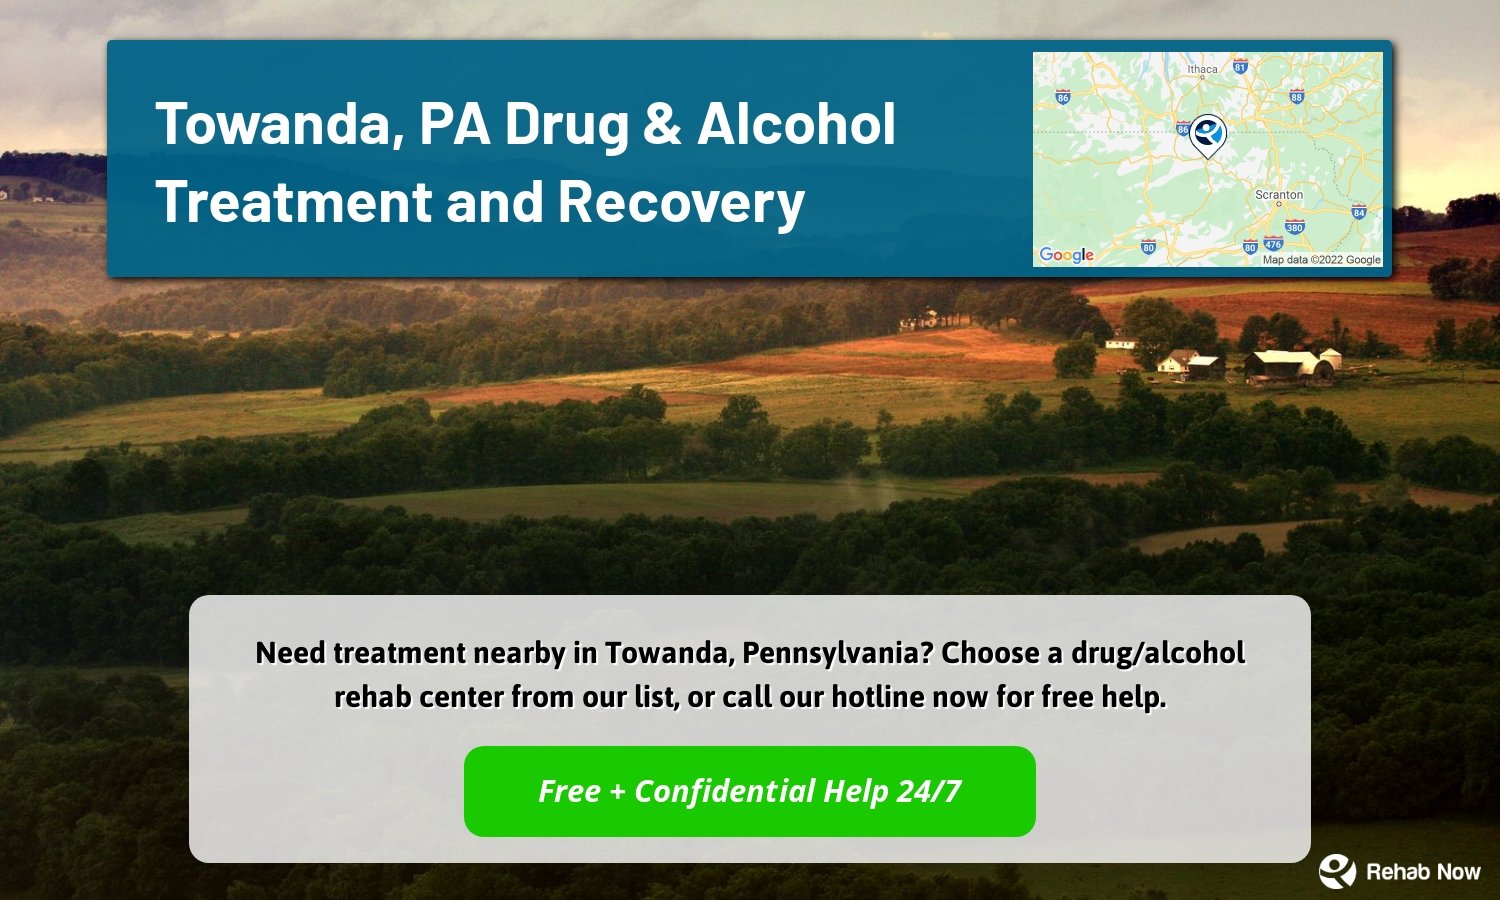 Need treatment nearby in Towanda, Pennsylvania? Choose a drug/alcohol rehab center from our list, or call our hotline now for free help.